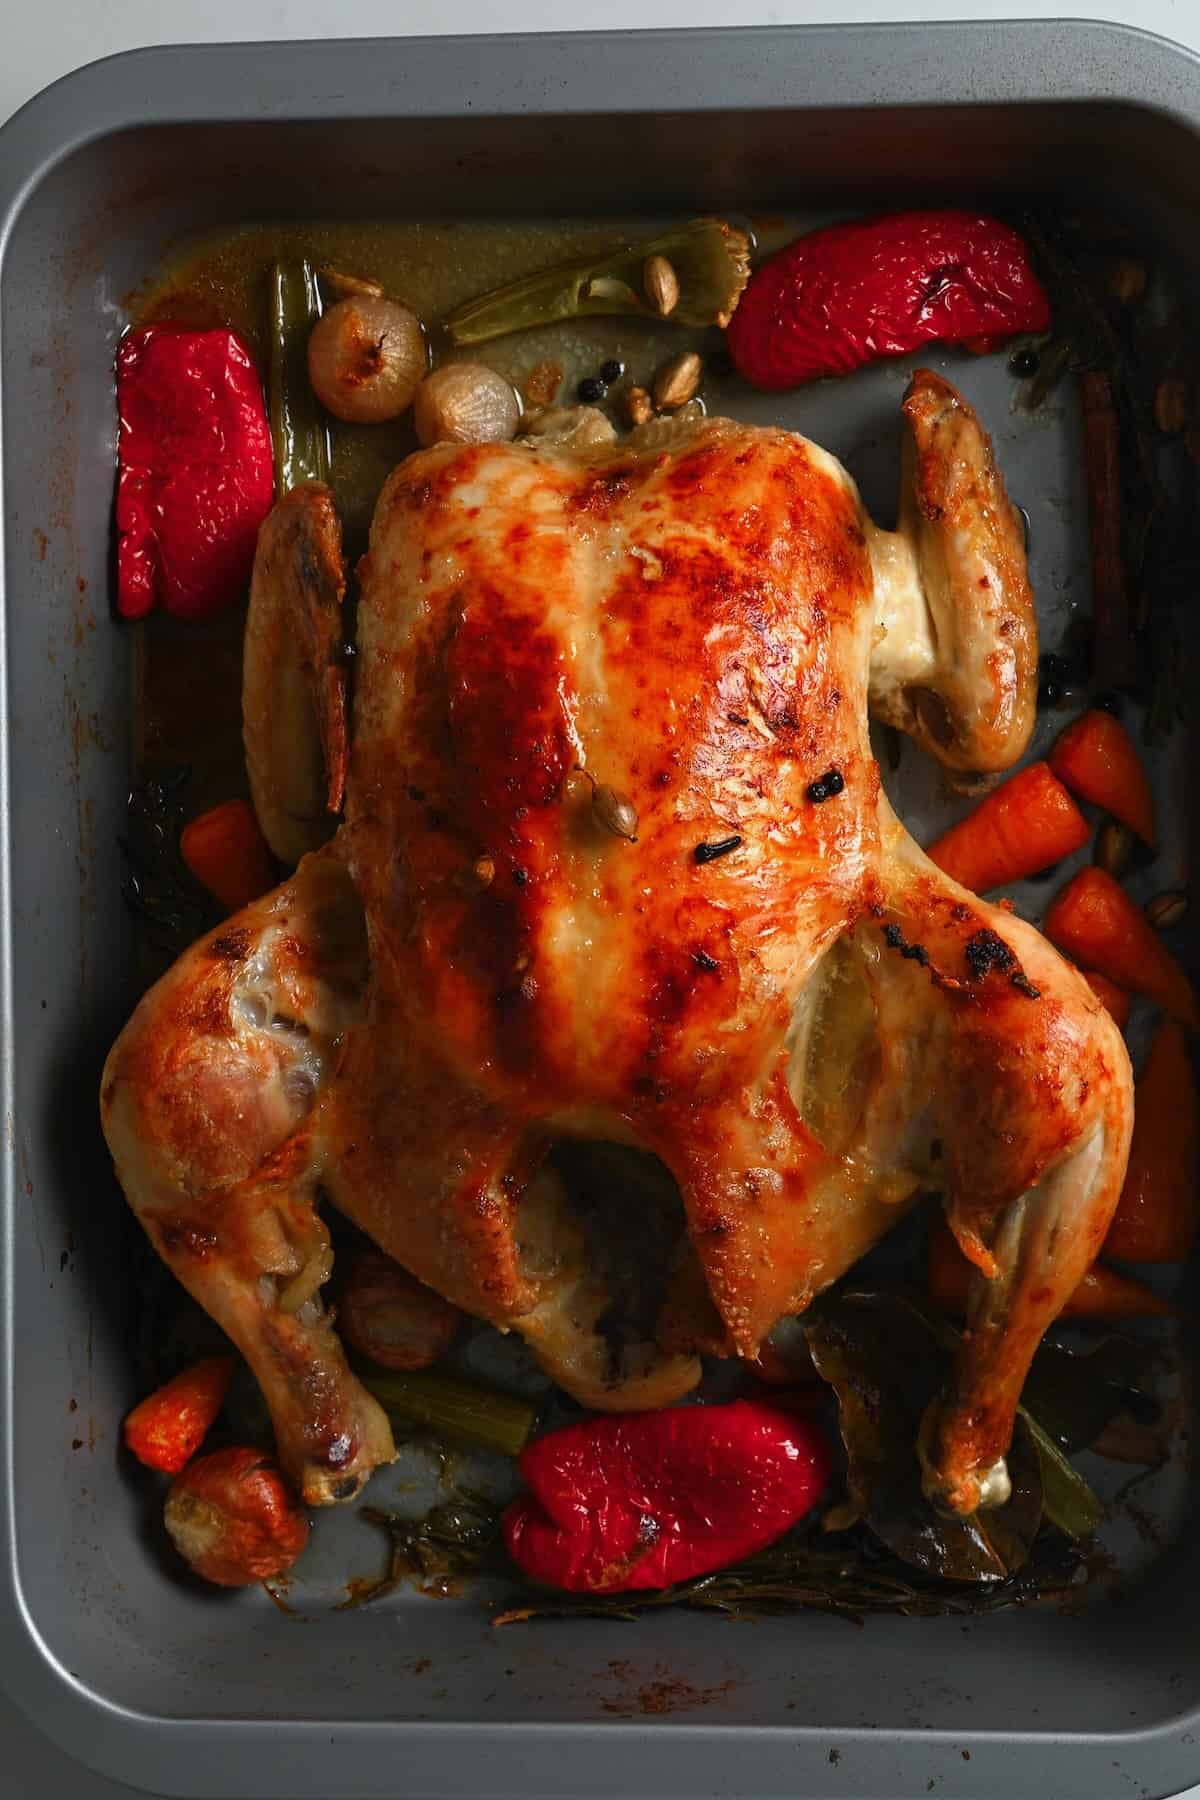 Roasted chicken on a baking tray